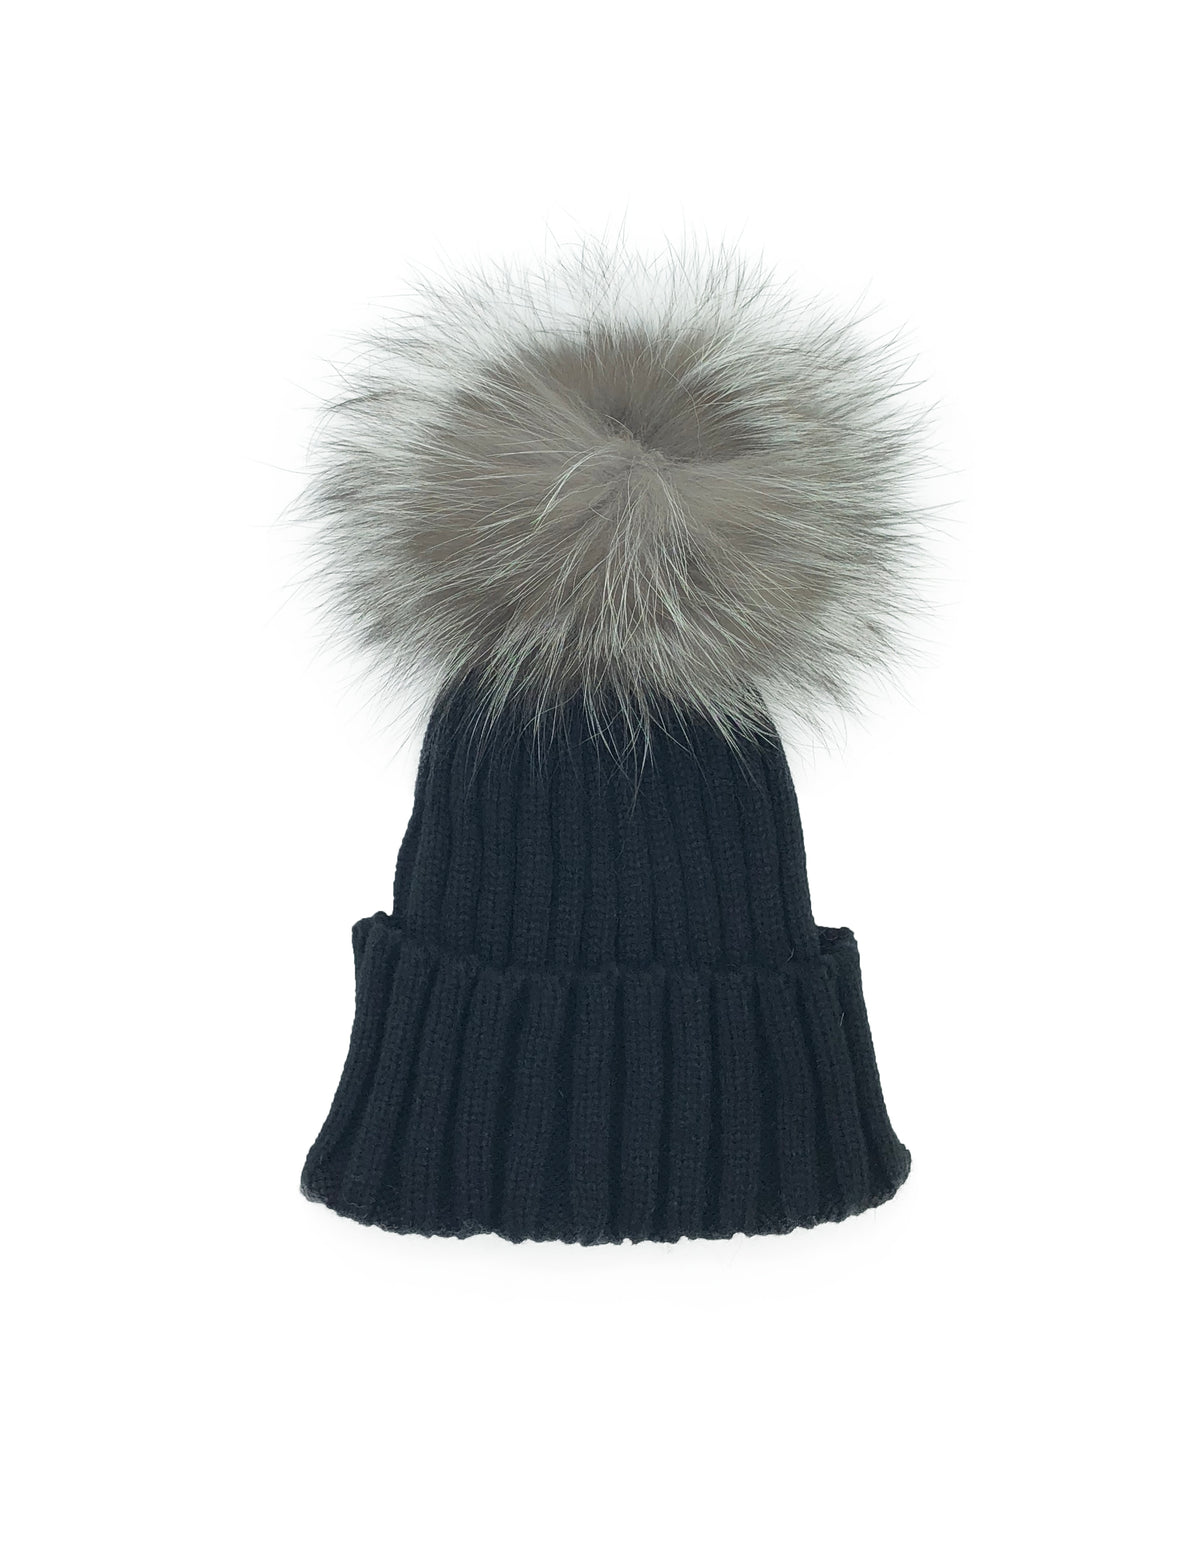 Black Cashmere Fingerless Gloves and Matching Hat with Fox Fur Pom - paulamariecollection